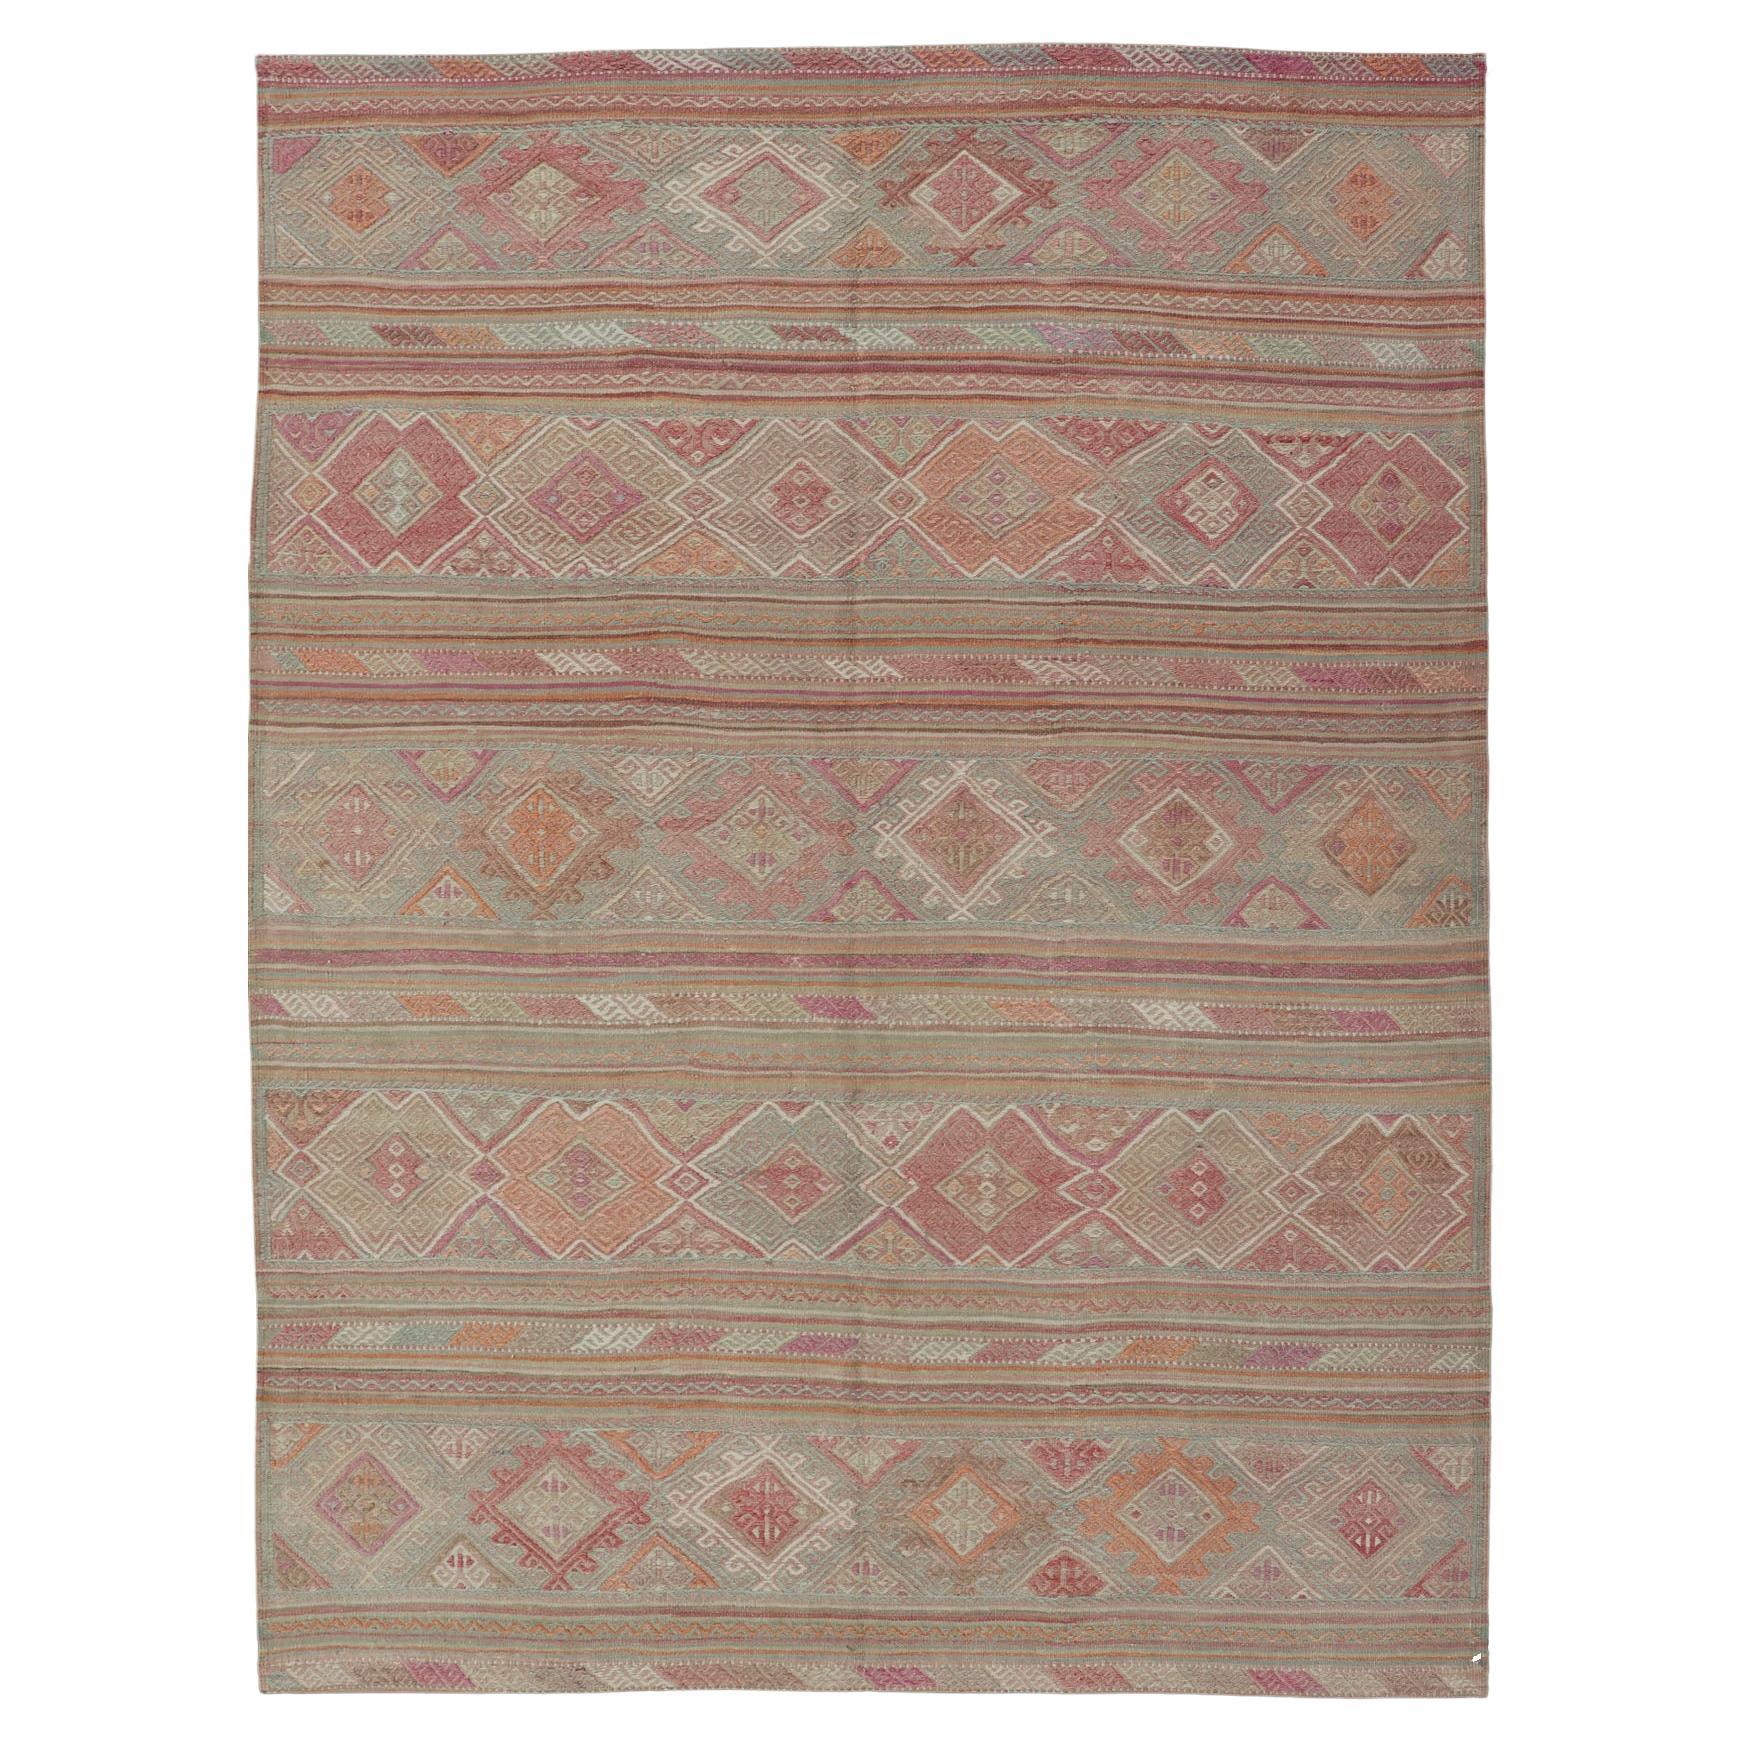 Colorful Vintage Embroidered Kilim with Stripes and Alternating Geometric Motifs For Sale